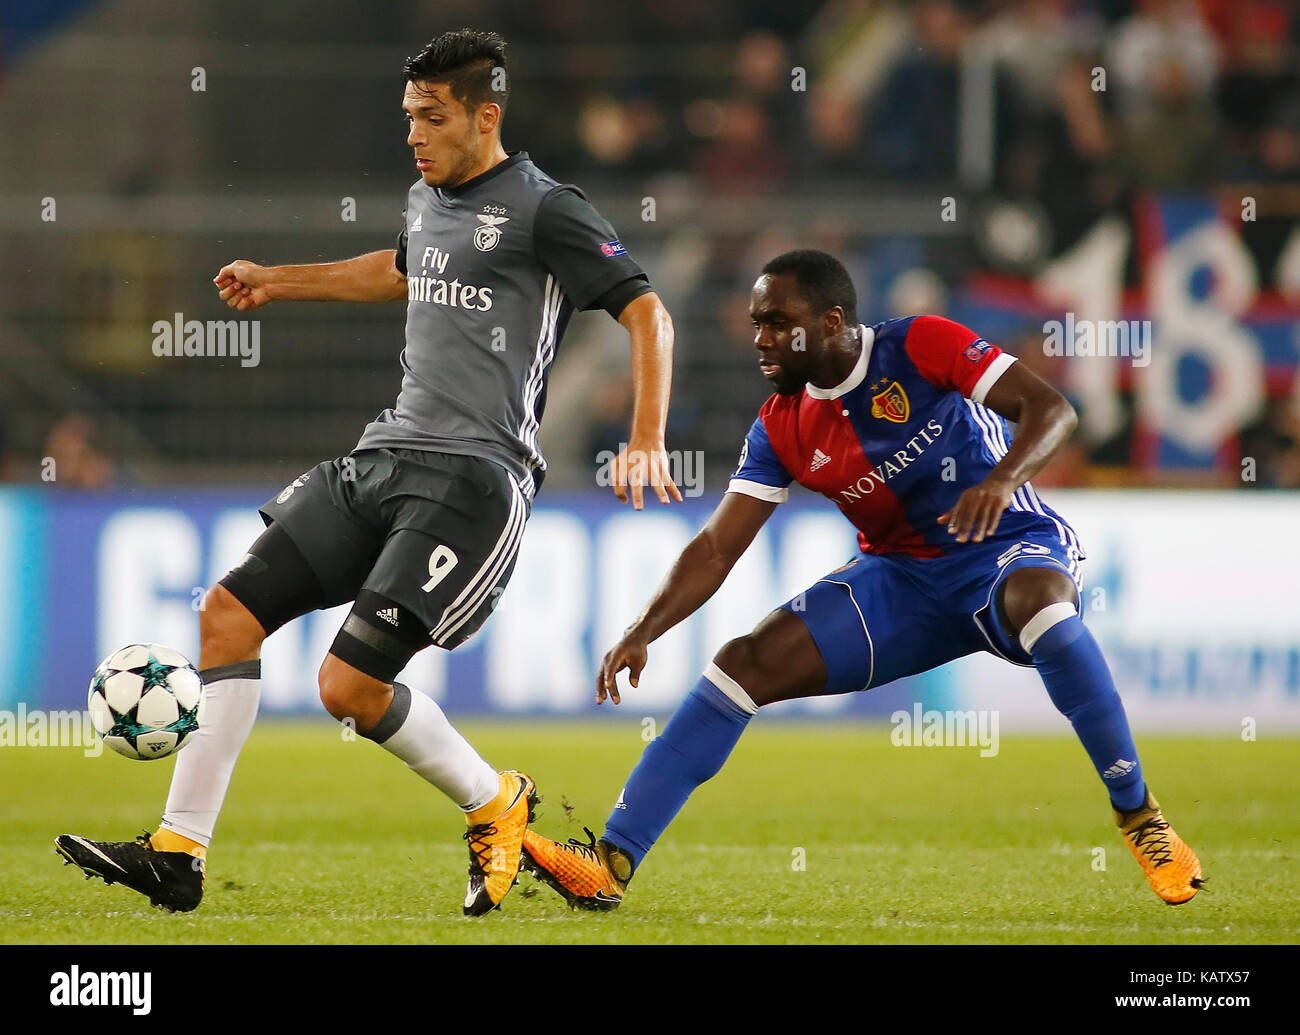 Basel, Switzerland. 27th Sep, 2017. Eder Balanta (R) of Basel competes with Raul Jimenez of Benfica during the UEFA Champions League group A match between Basel and Benfica in Basel, Switzerland, on Sept. 27, 2017. Basel won 5-0. Credit: Michele Limina/Xinhua/Alamy Live News Stock Photo